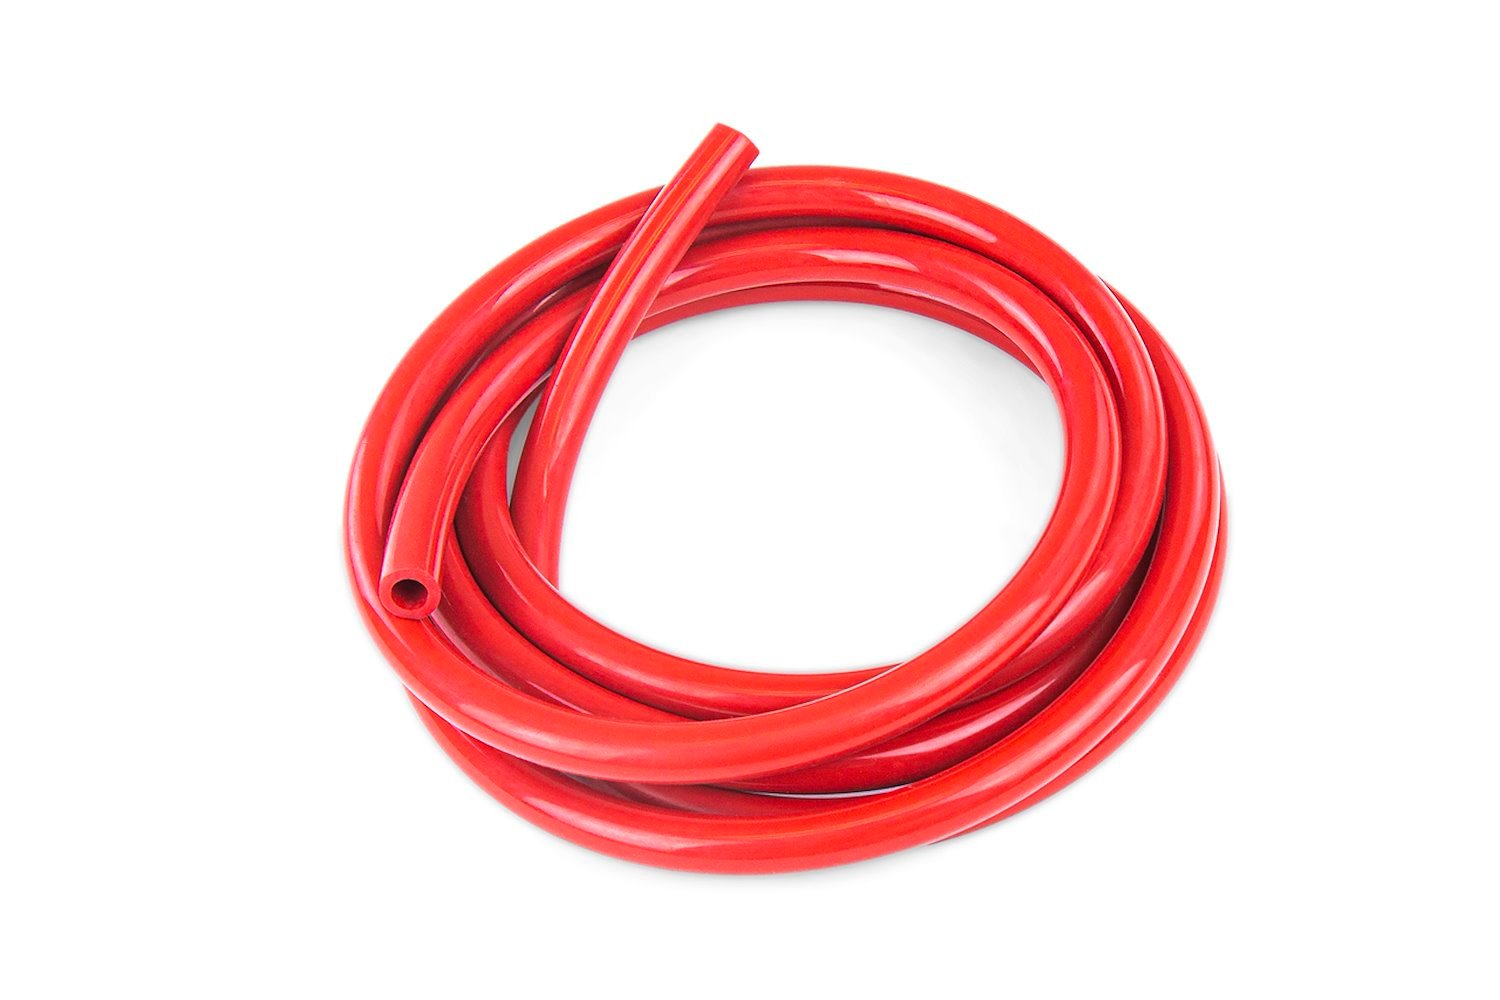 HTSVH3TW-REDx5 High-Temperature Silicone Vacuum Hose Tubing, 1/8 in. ID, 5 ft. Roll, Red